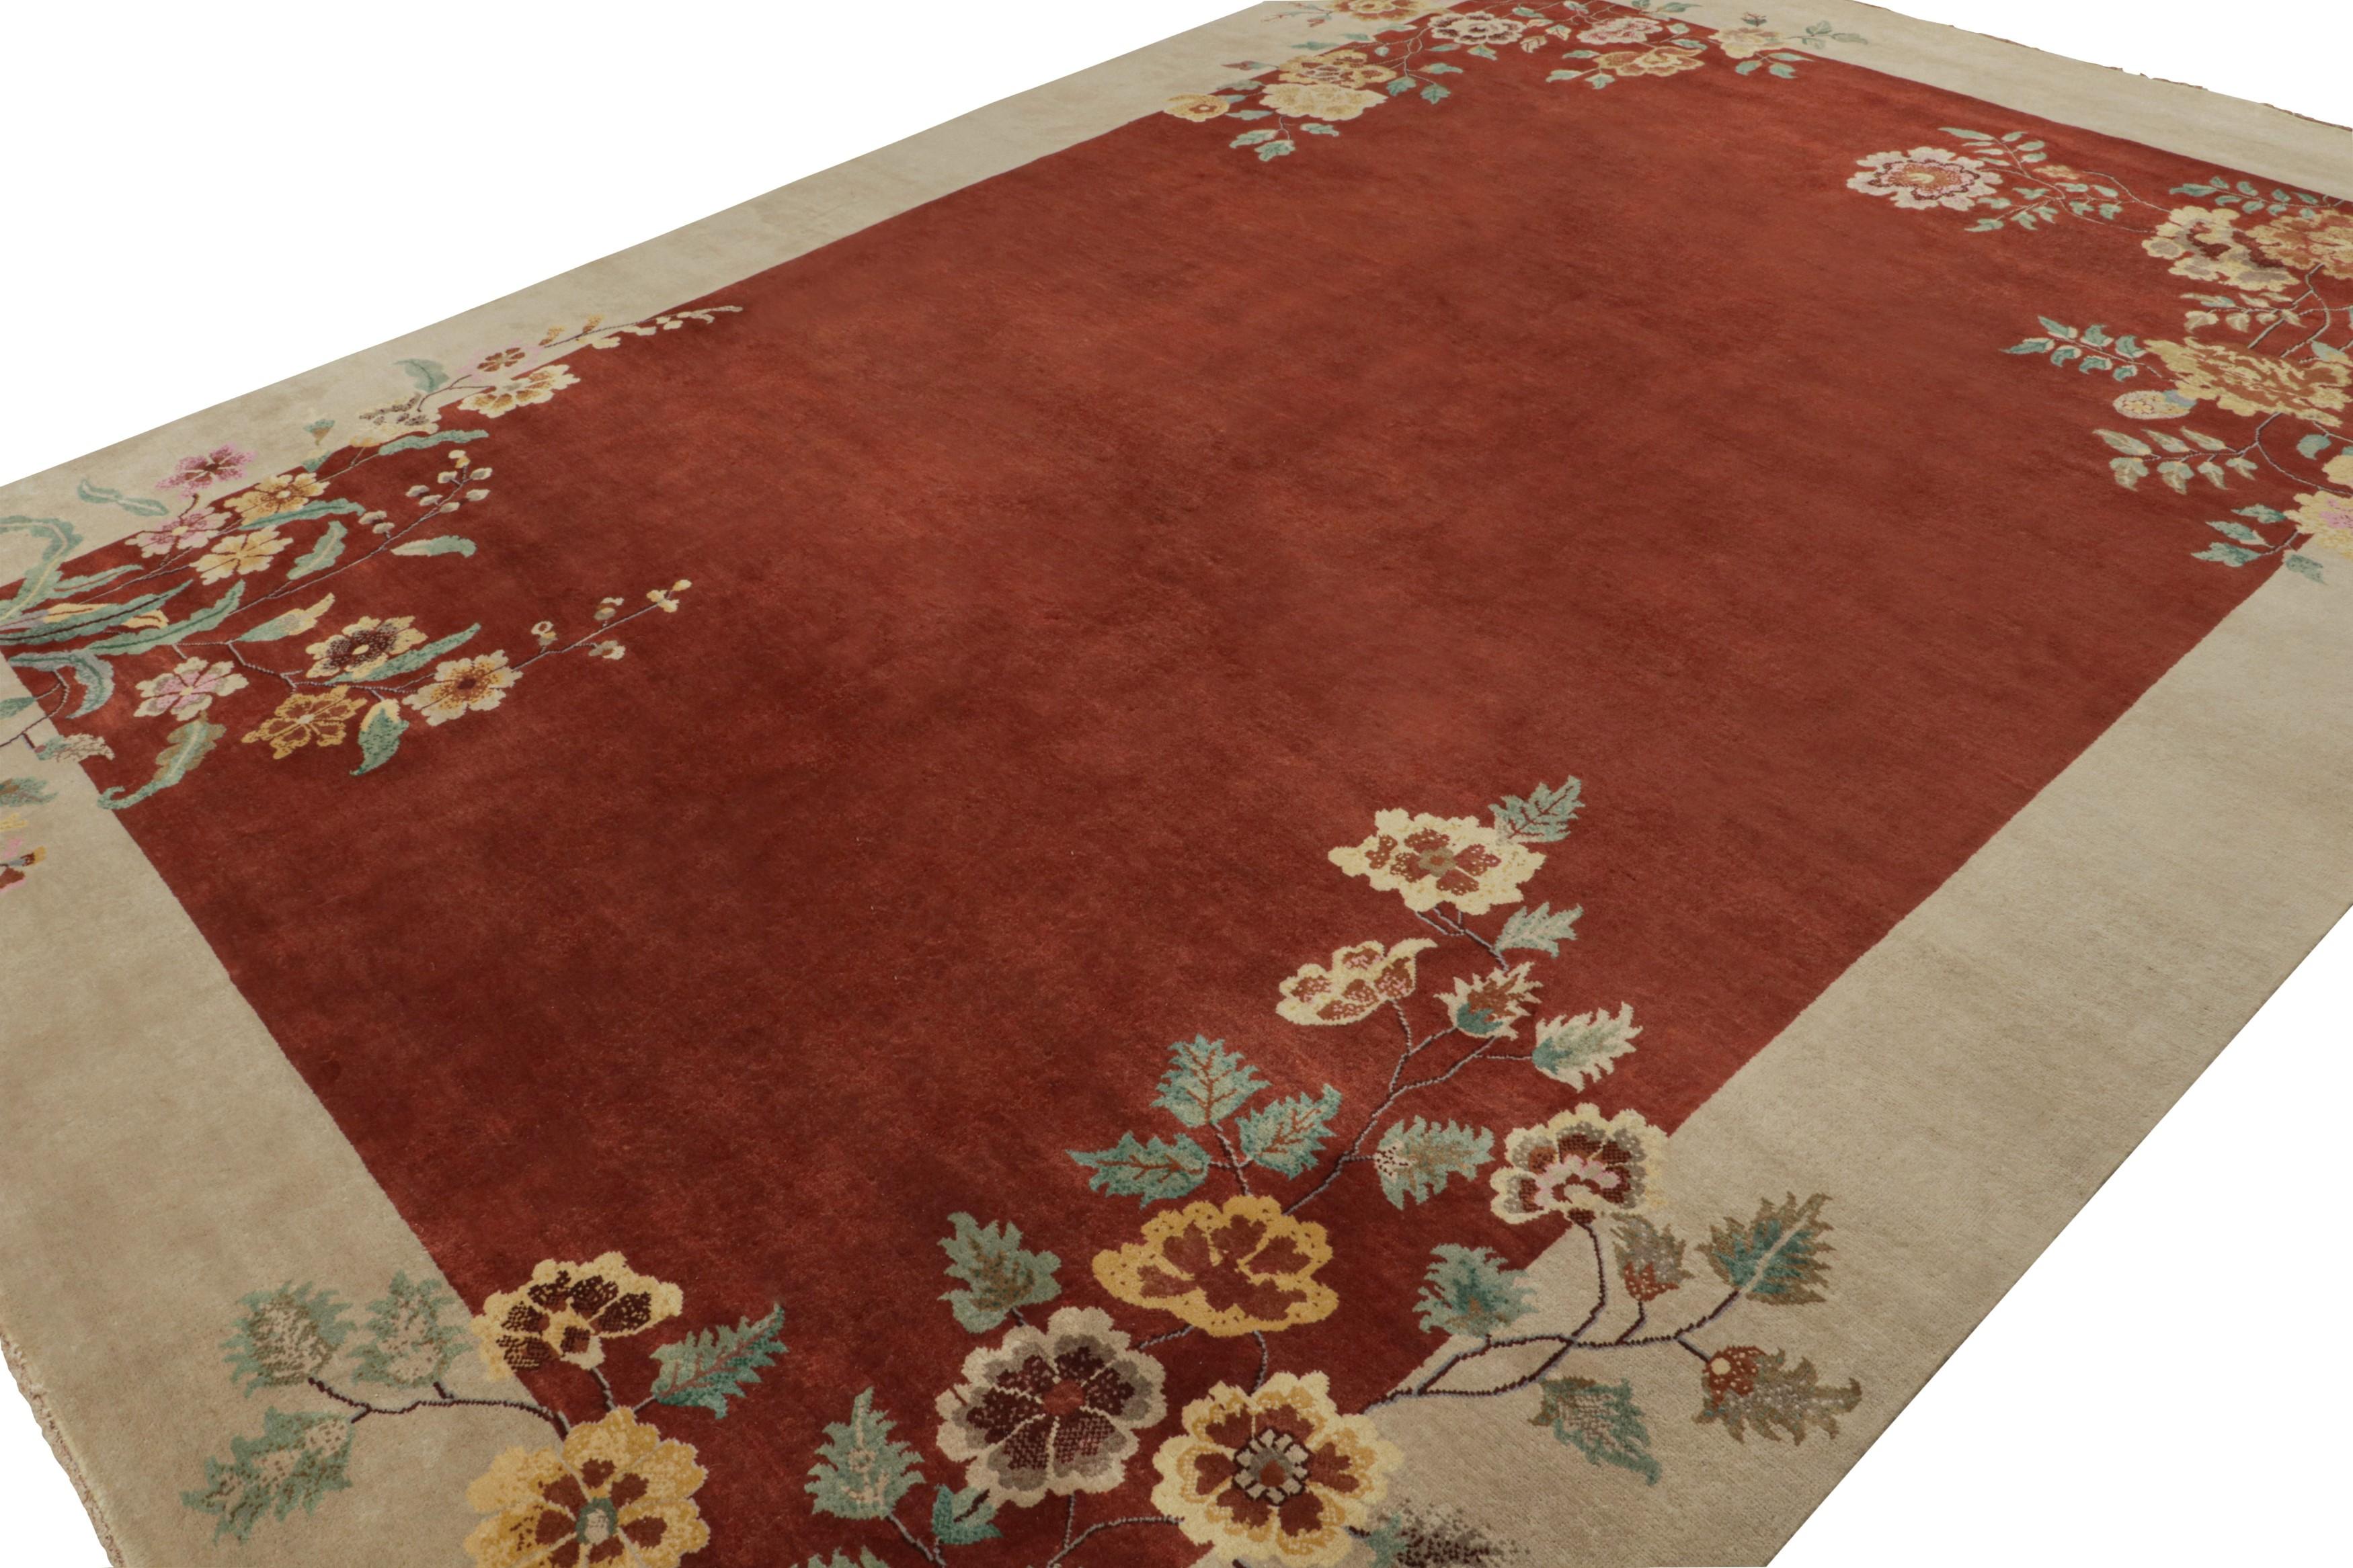 This 10x14 rug is an exciting new addition to the contemporary Art Deco rug collection by Rug & Kilim.

On the Design: 

Hand-knotted in wool, this rug is inspired by the Chinese Art Deco rug style of the 1920s. Its design enjoys a red field encased